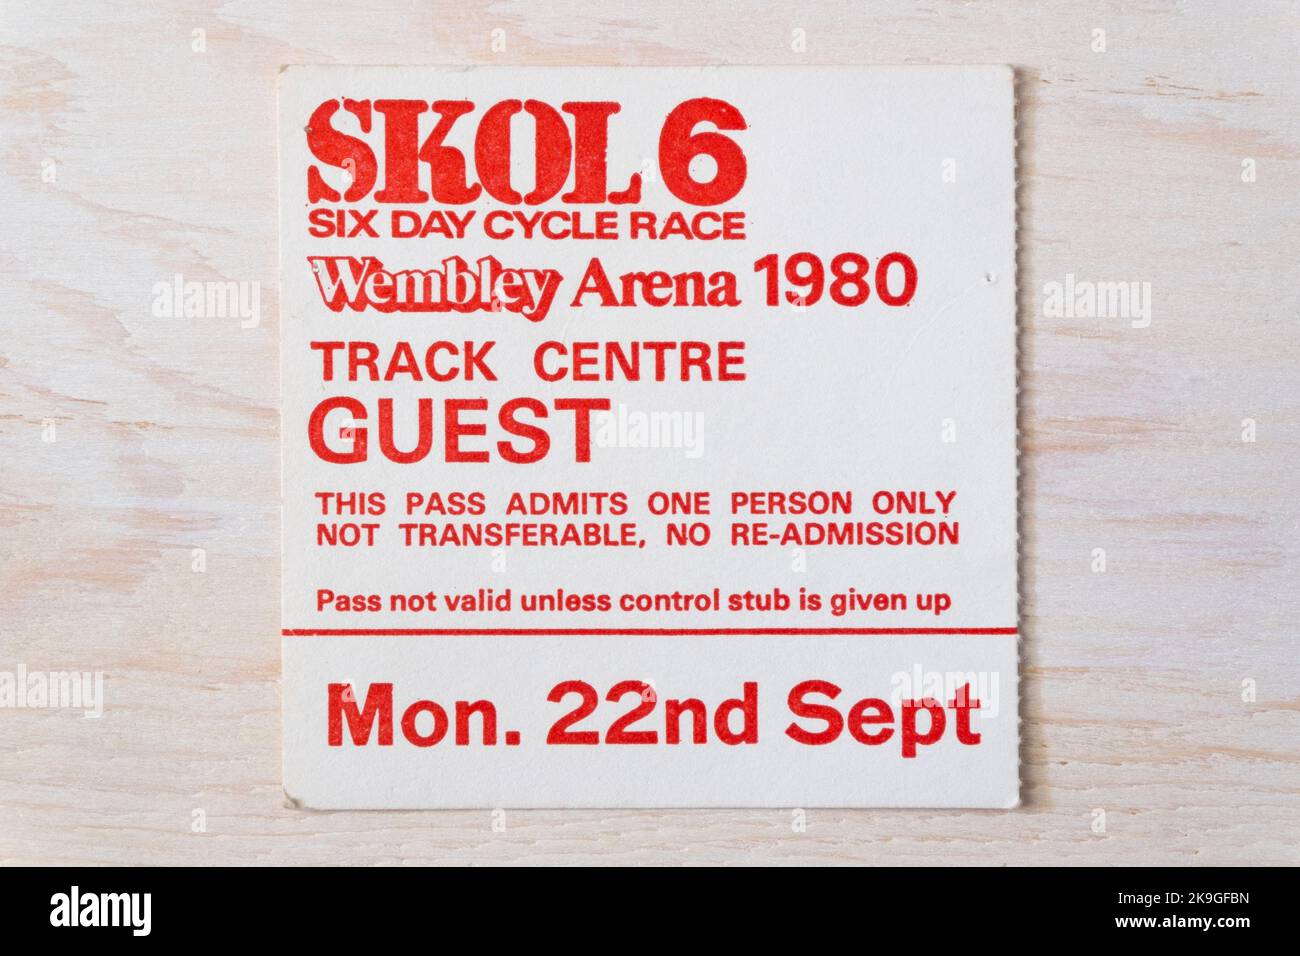 Ticket stub for the Skol 6 Day Cycle Race, an indoor track cycling event with different types of races throughout the week in the 1970s & 1980s at Wem Stock Photo